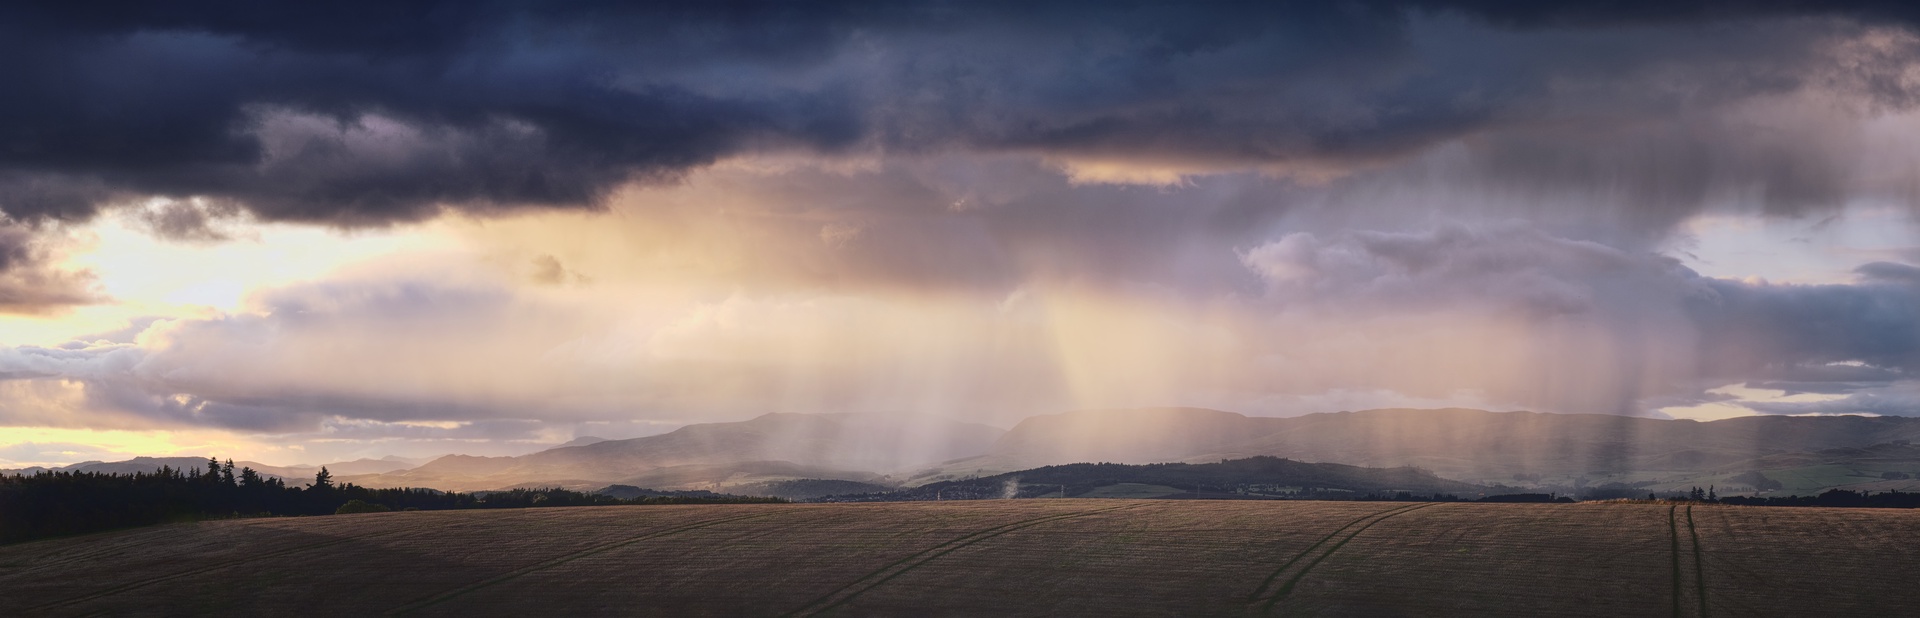 Display image: Sunset and Showers